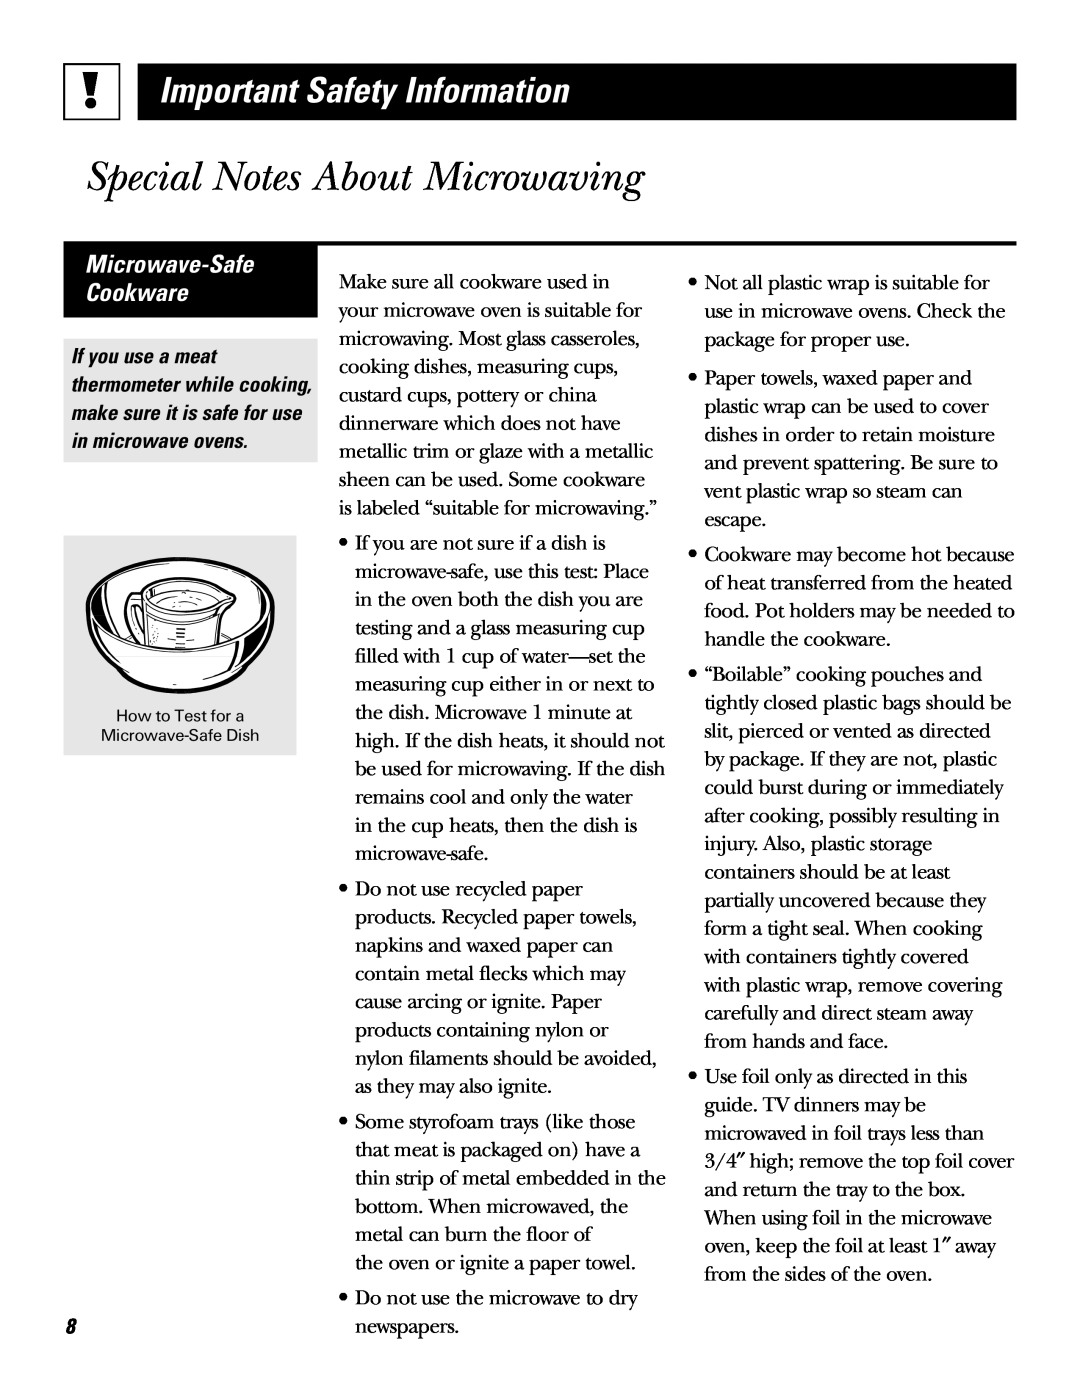 GE JE610, JE620 Microwave-Safe Cookware, Special Notes About Microwaving, Important Safety Information 